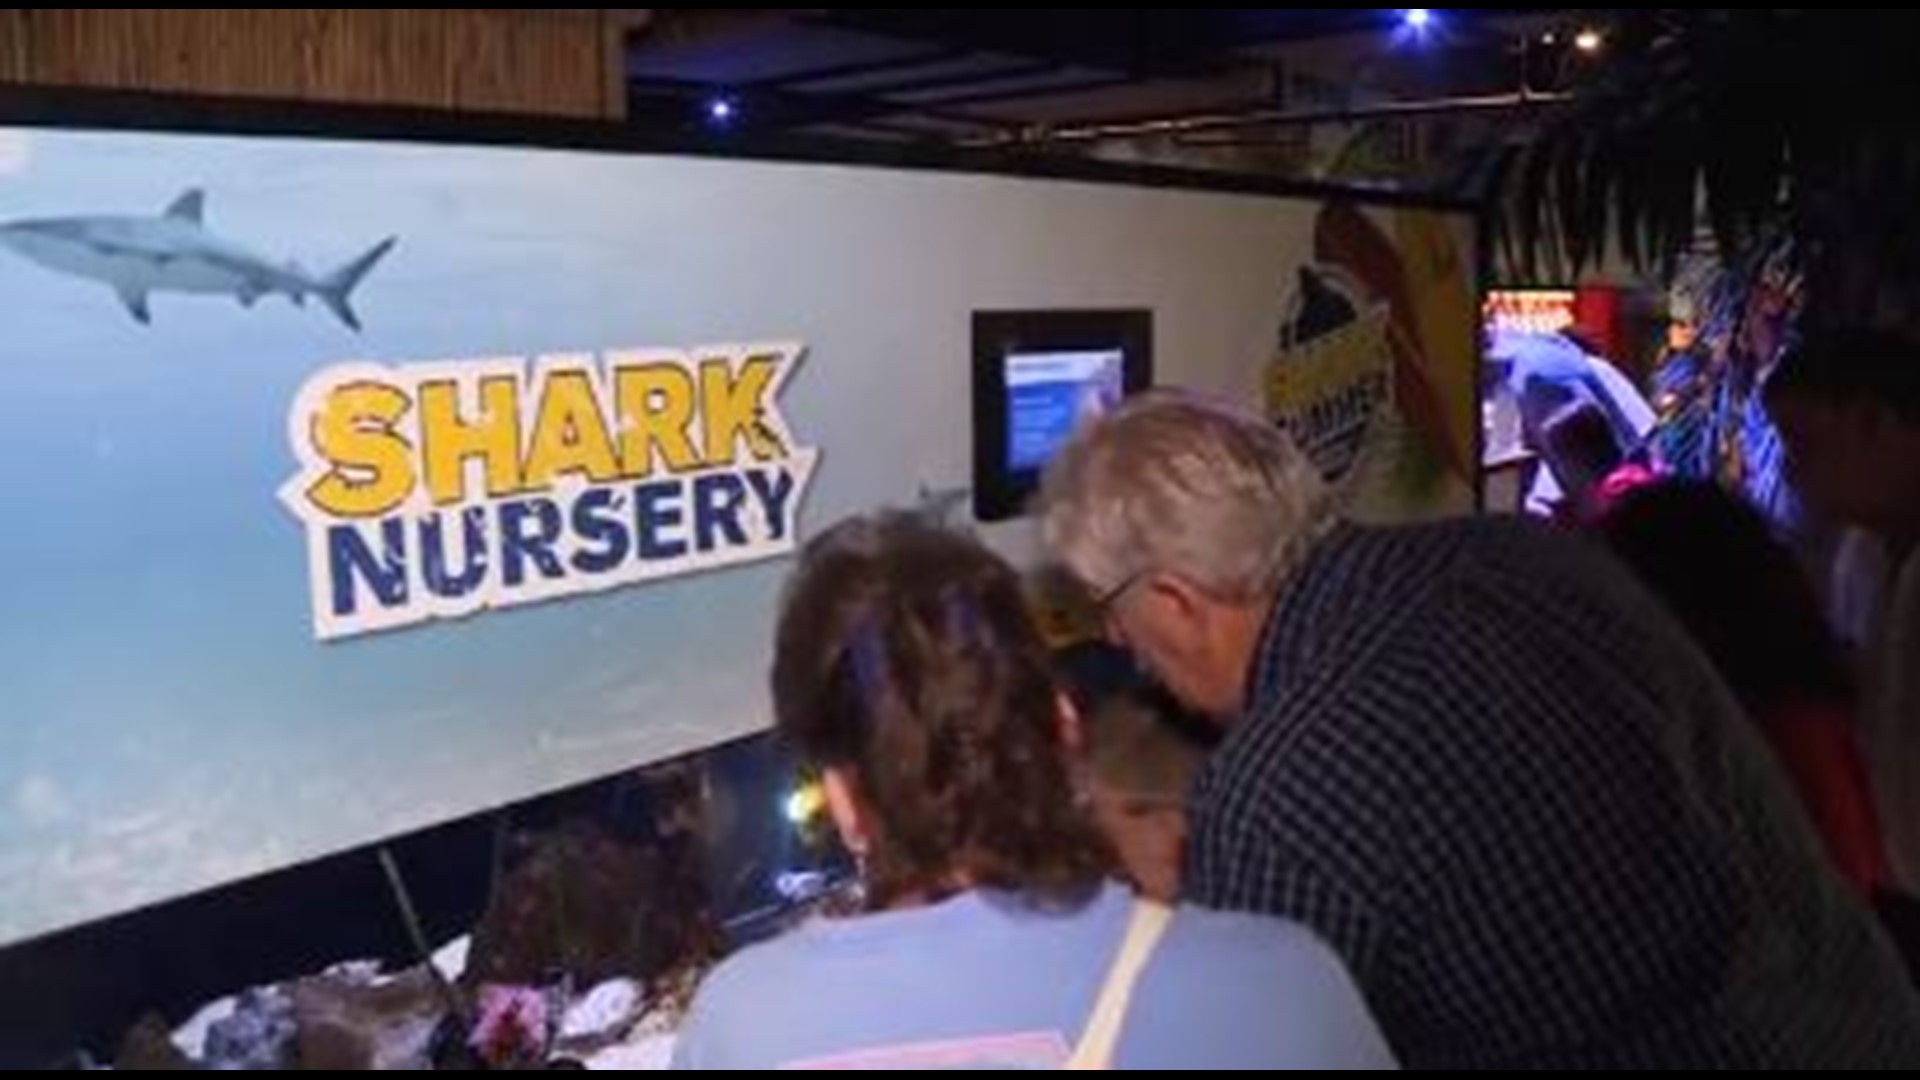 The Newport Aquarium is now home to a new baby shark, on exhibit for the first time now during Shark Summer. Newport Aquarium is located at 1 Levee Way in Newport, KY. For more information, call 1-800-406-3473 or go to NewportAquarium.com.